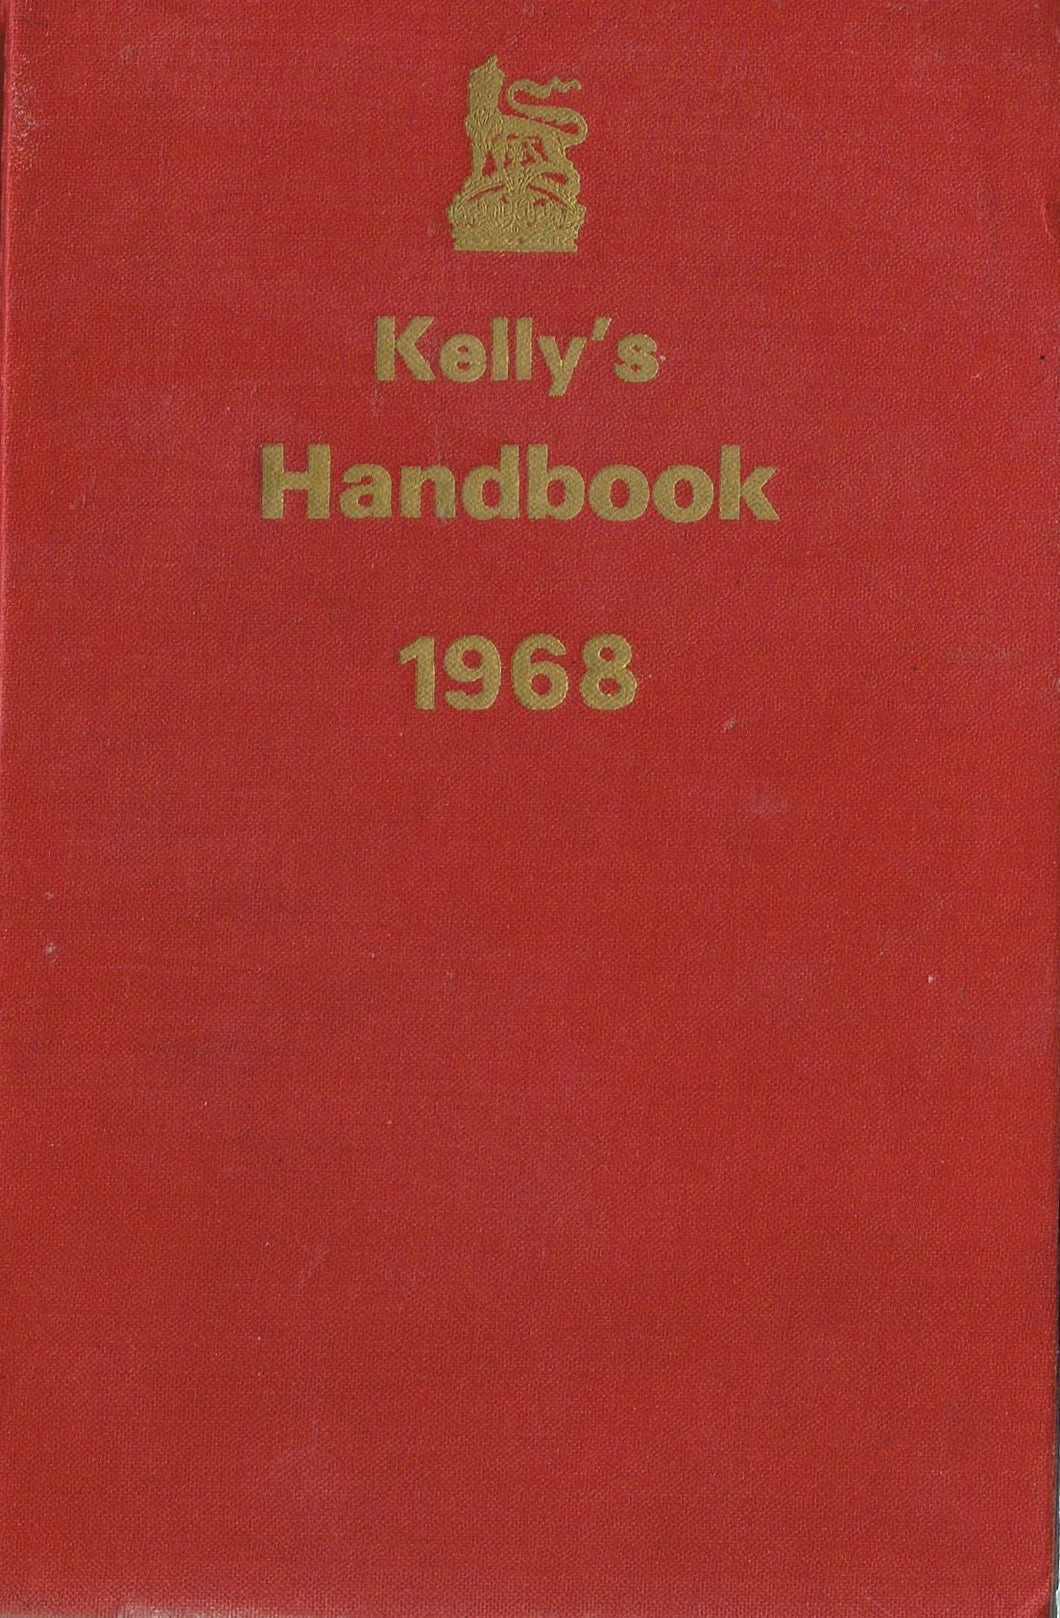 Kelly's Handbook to the Titled, Landed and Official Classes. 1968